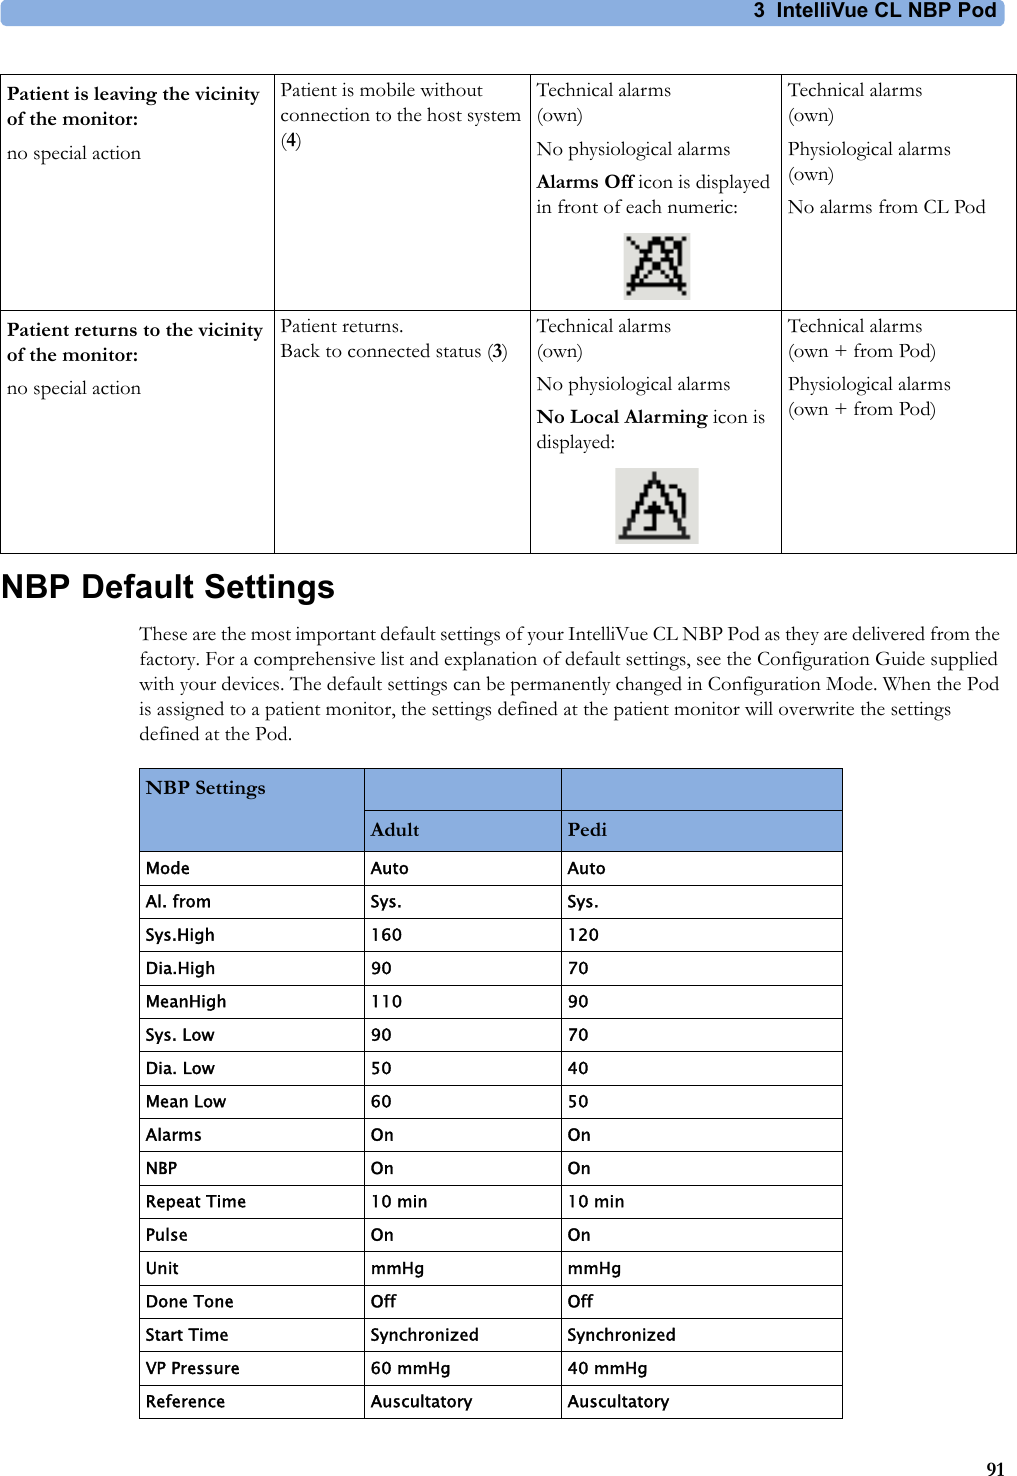 3 IntelliVue CL NBP Pod91NBP Default SettingsThese are the most important default settings of your IntelliVue CL NBP Pod as they are delivered from the factory. For a comprehensive list and explanation of default settings, see the Configuration Guide supplied with your devices. The default settings can be permanently changed in Configuration Mode. When the Pod is assigned to a patient monitor, the settings defined at the patient monitor will overwrite the settings defined at the Pod.Patient is leaving the vicinity of the monitor:no special actionPatient is mobile without connection to the host system (4)Technical alarms (own)No physiological alarmsAlarms Off icon is displayed in front of each numeric:Technical alarms (own)Physiological alarms(own)No alarms from CL PodPatient returns to the vicinity of the monitor:no special actionPatient returns.Back to connected status (3)Technical alarms (own)No physiological alarmsNo Local Alarming icon is displayed:Technical alarms (own + from Pod)Physiological alarms(own + from Pod)NBP SettingsAdult PediMode Auto AutoAl. from Sys. Sys.Sys.High 160 120Dia.High 90 70MeanHigh 110 90Sys. Low 90 70Dia. Low 50 40Mean Low 60 50Alarms On OnNBP On OnRepeat Time 10 min 10 minPulse On OnUnit mmHg mmHgDone Tone Off OffStart Time Synchronized SynchronizedVP Pressure 60 mmHg 40 mmHgReference Auscultatory Auscultatory